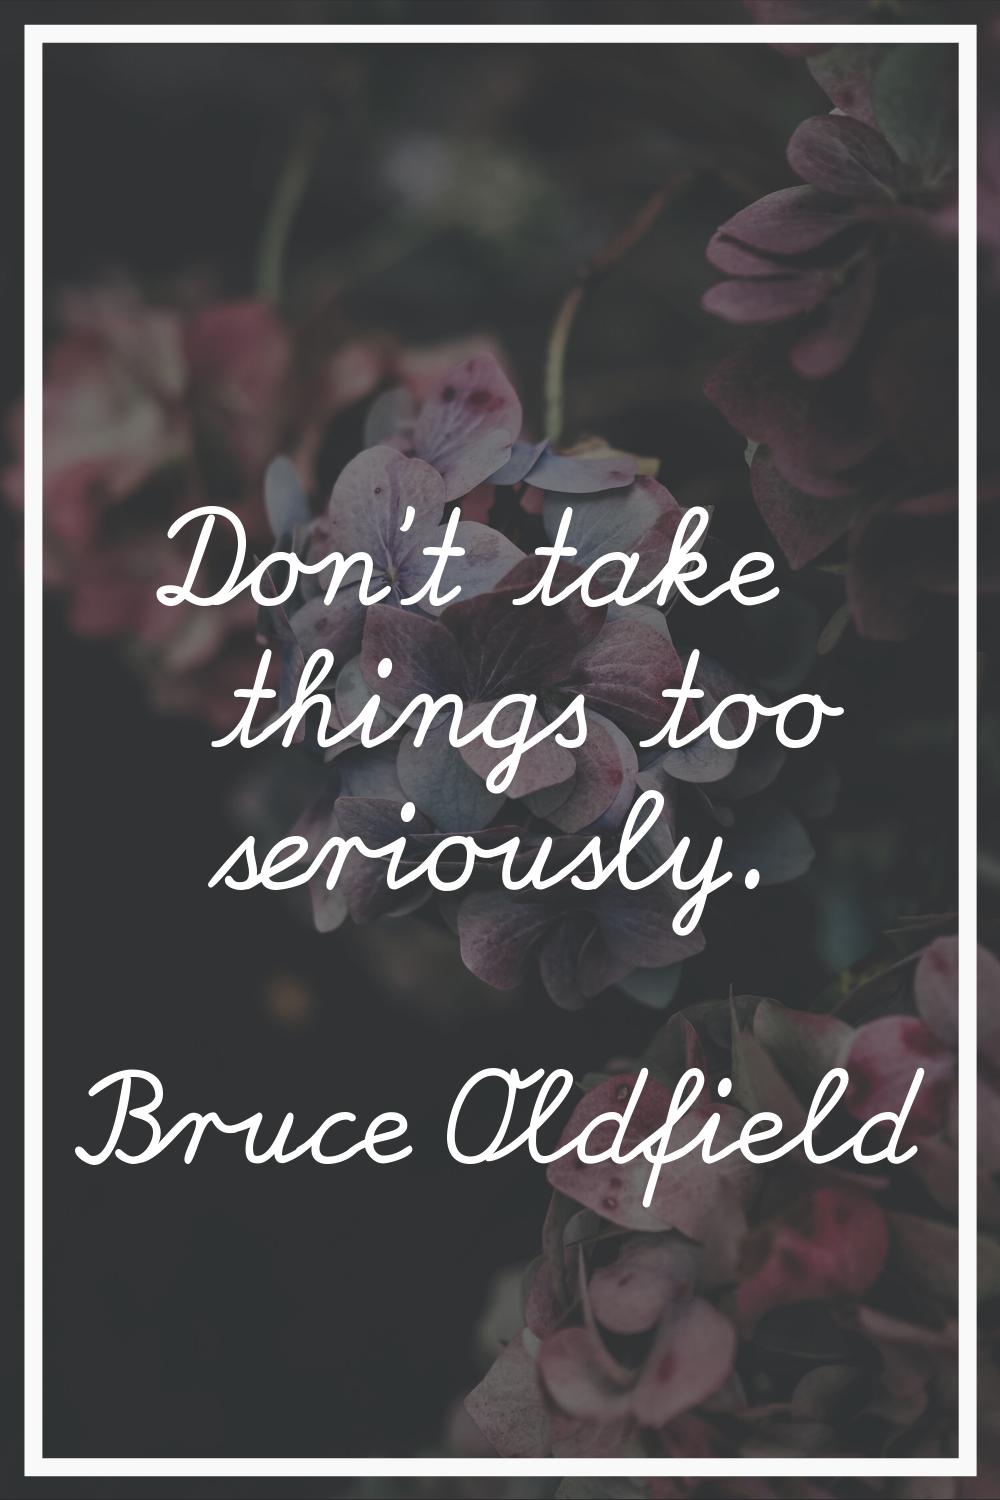 Don't take things too seriously.